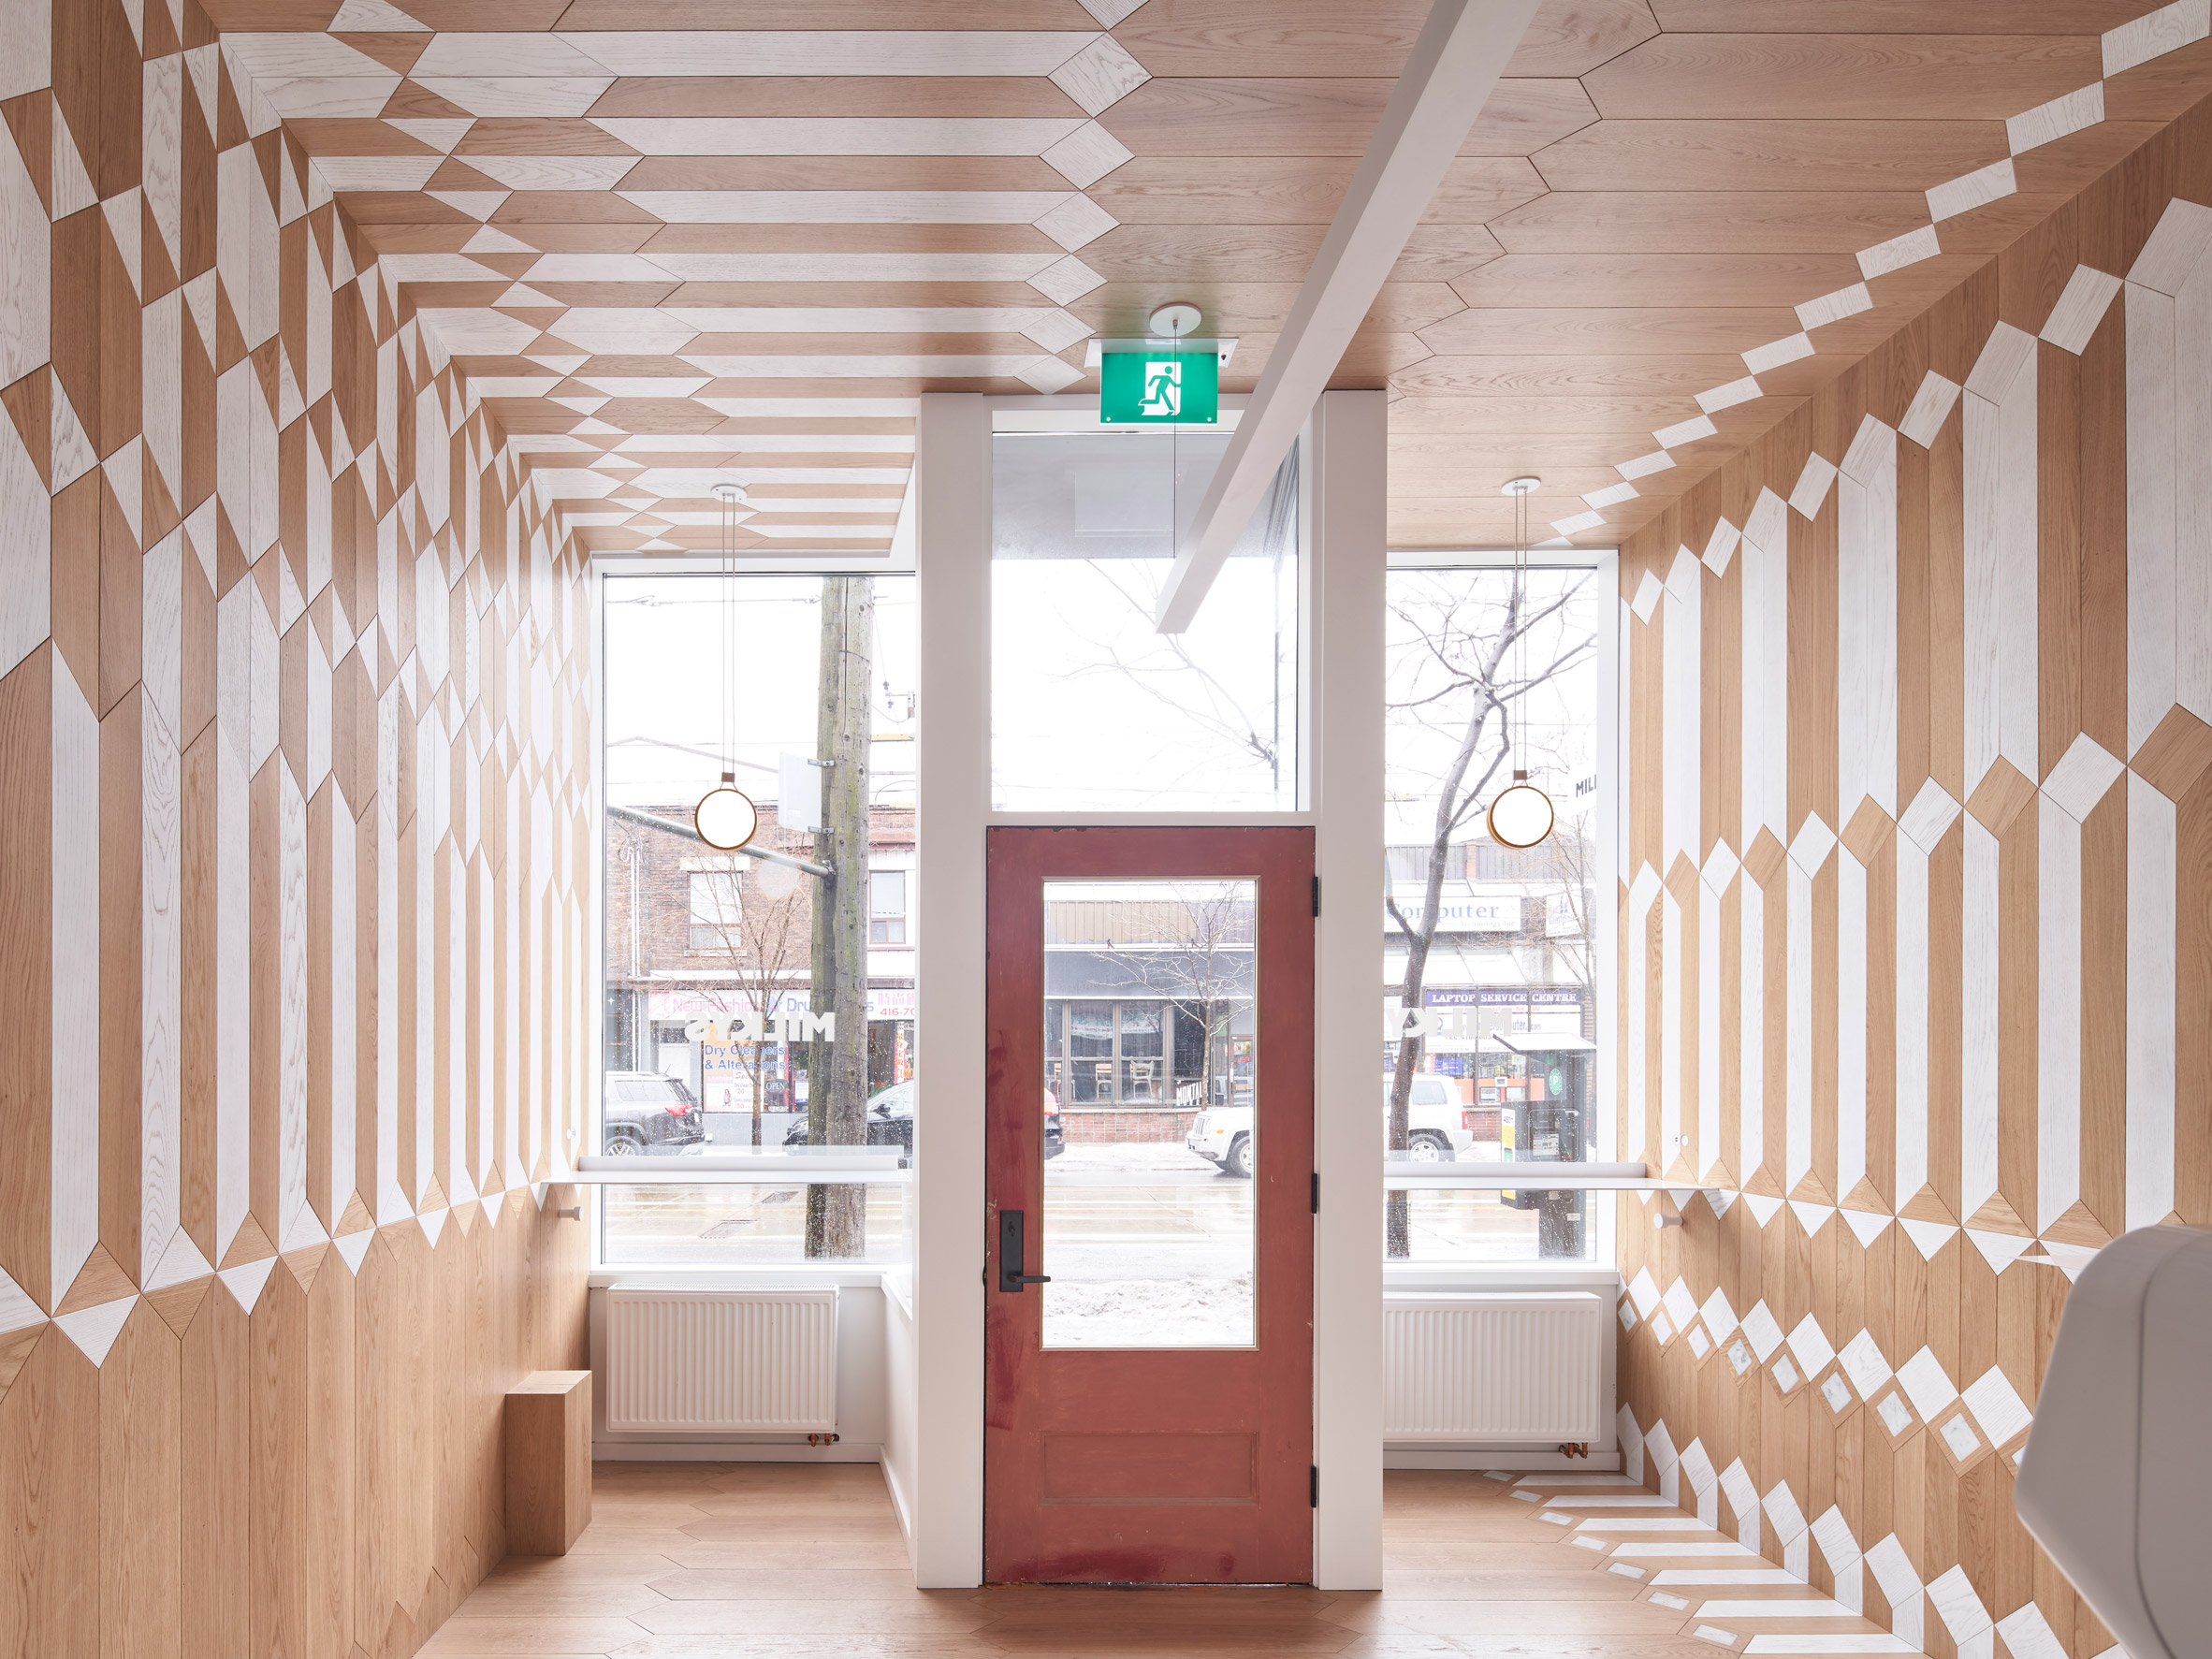 Batay-Csorba designs Milky's coffee bar in Toronto without furniture